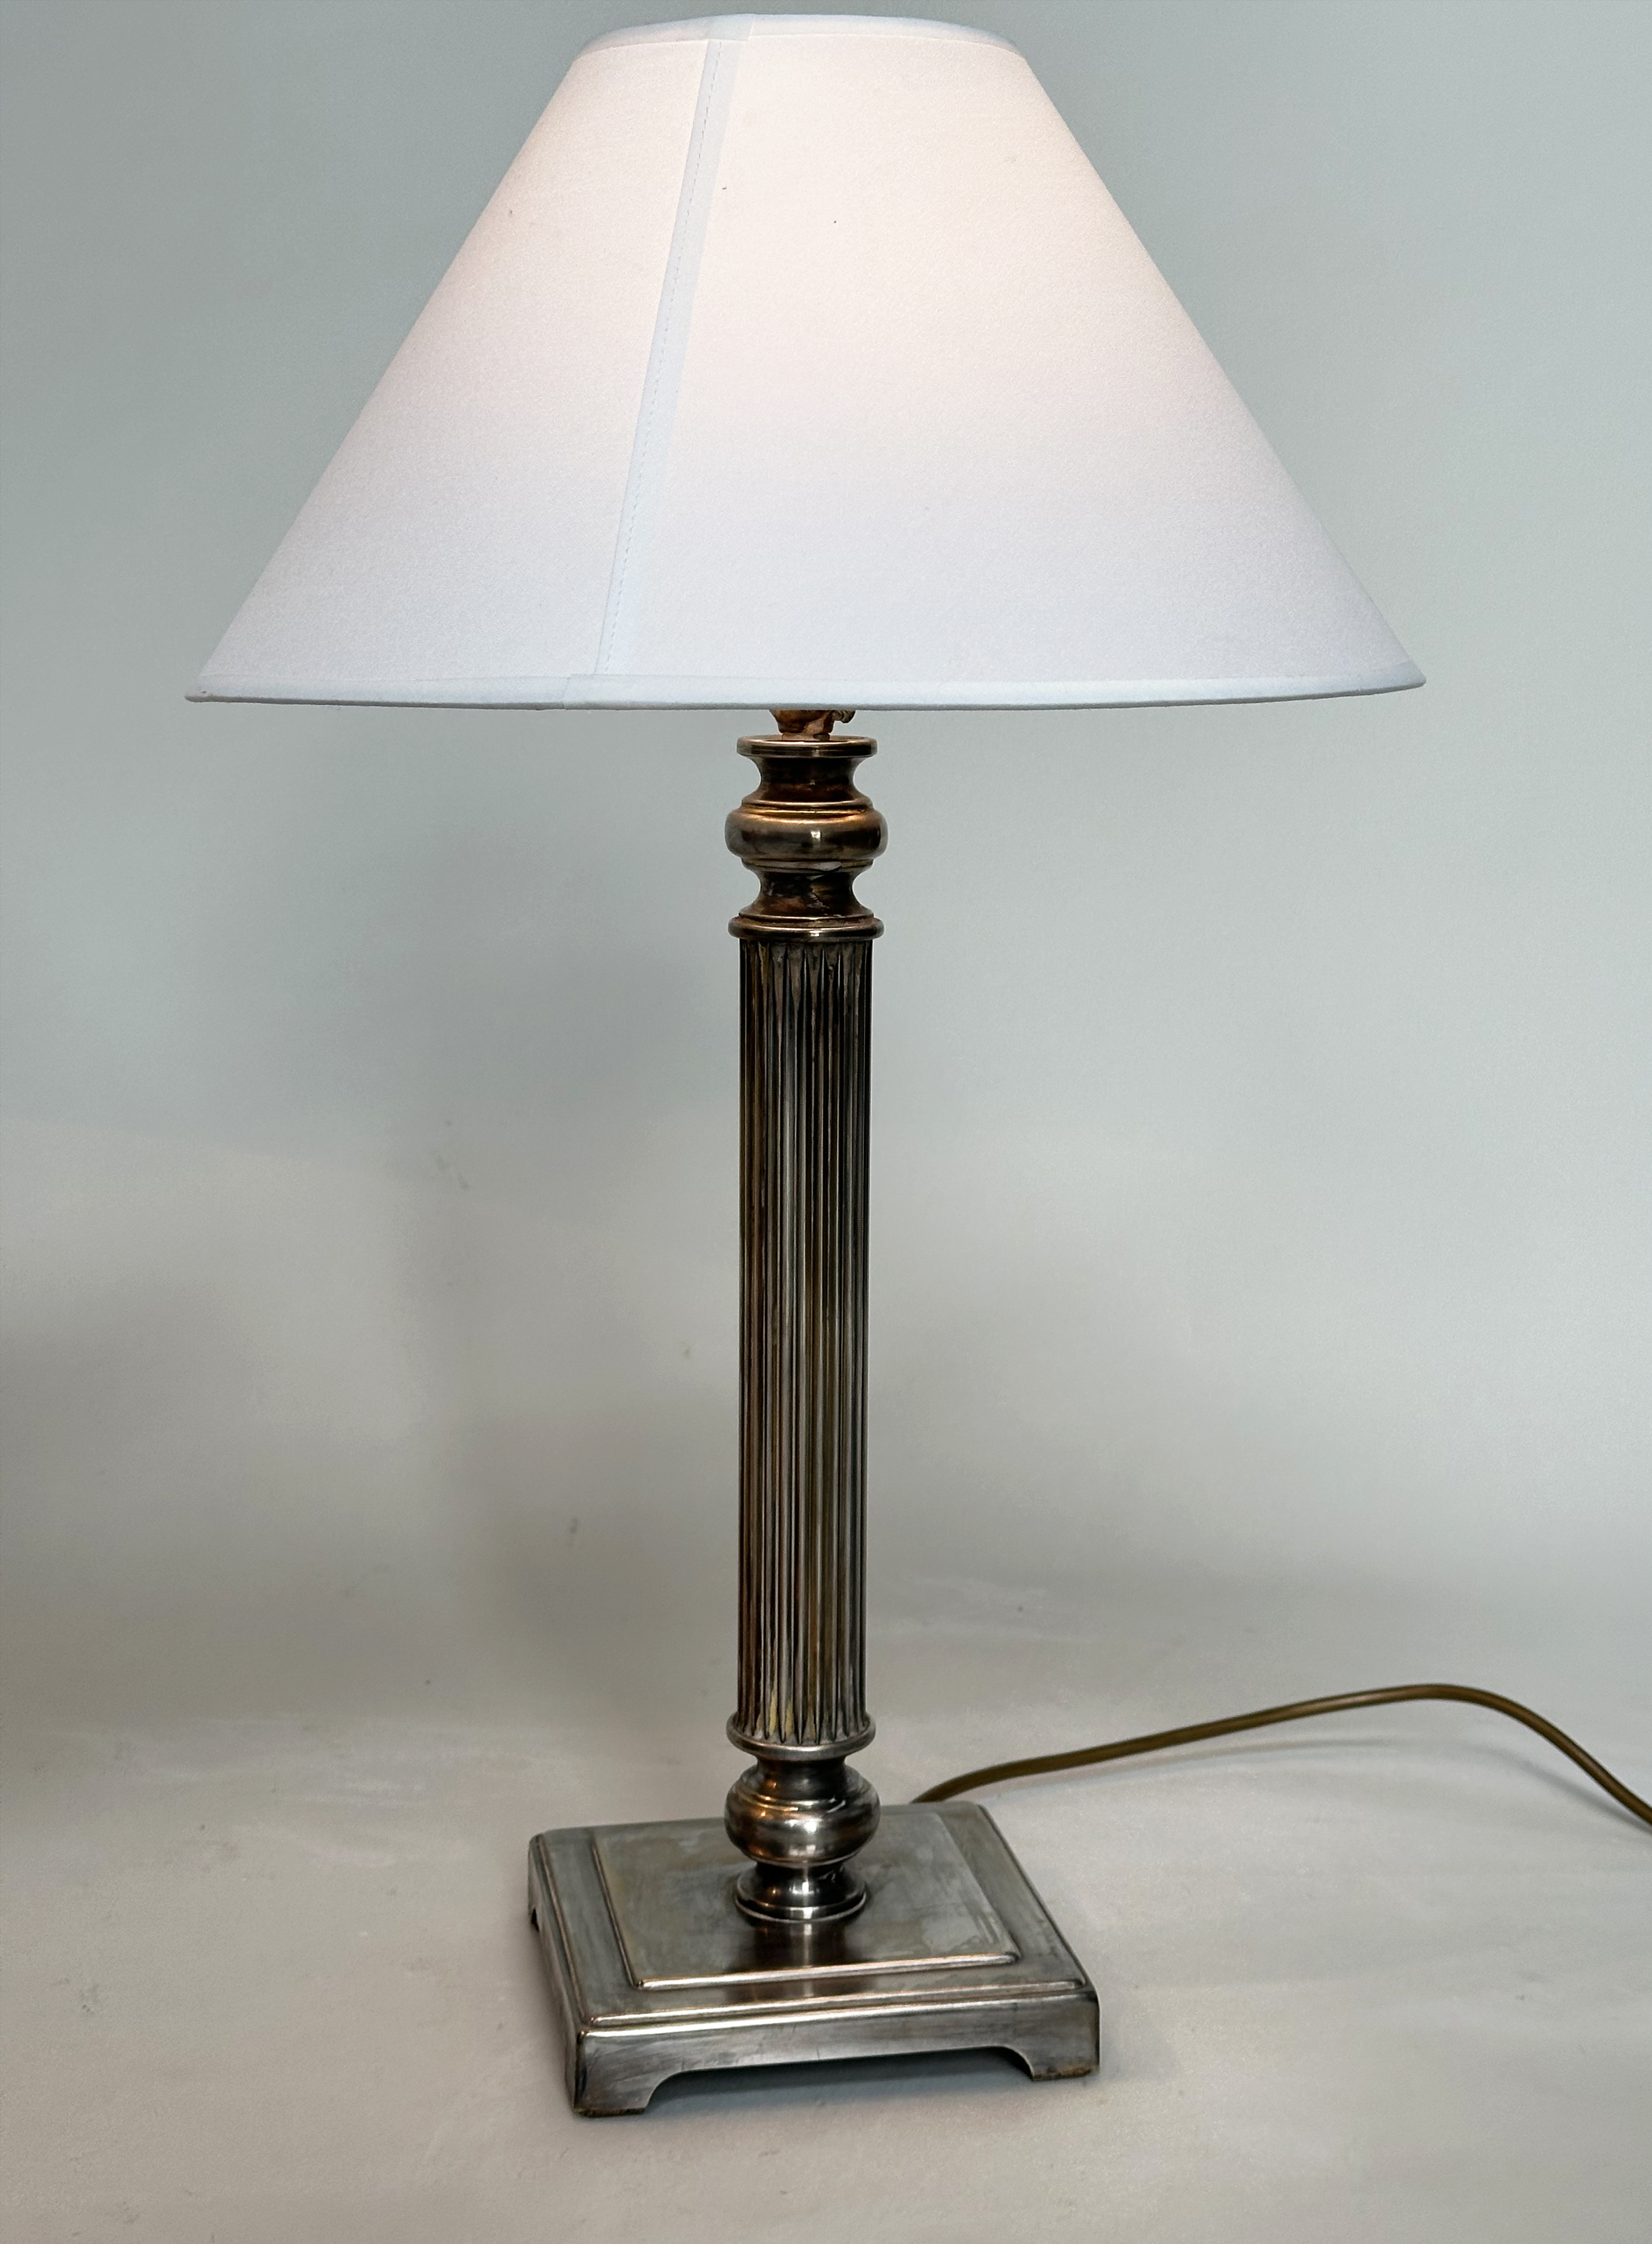 TABLE LAMPS, a pair, silvered metal each with reeded column, and square bases (with shades), 66cm H. - Image 2 of 6